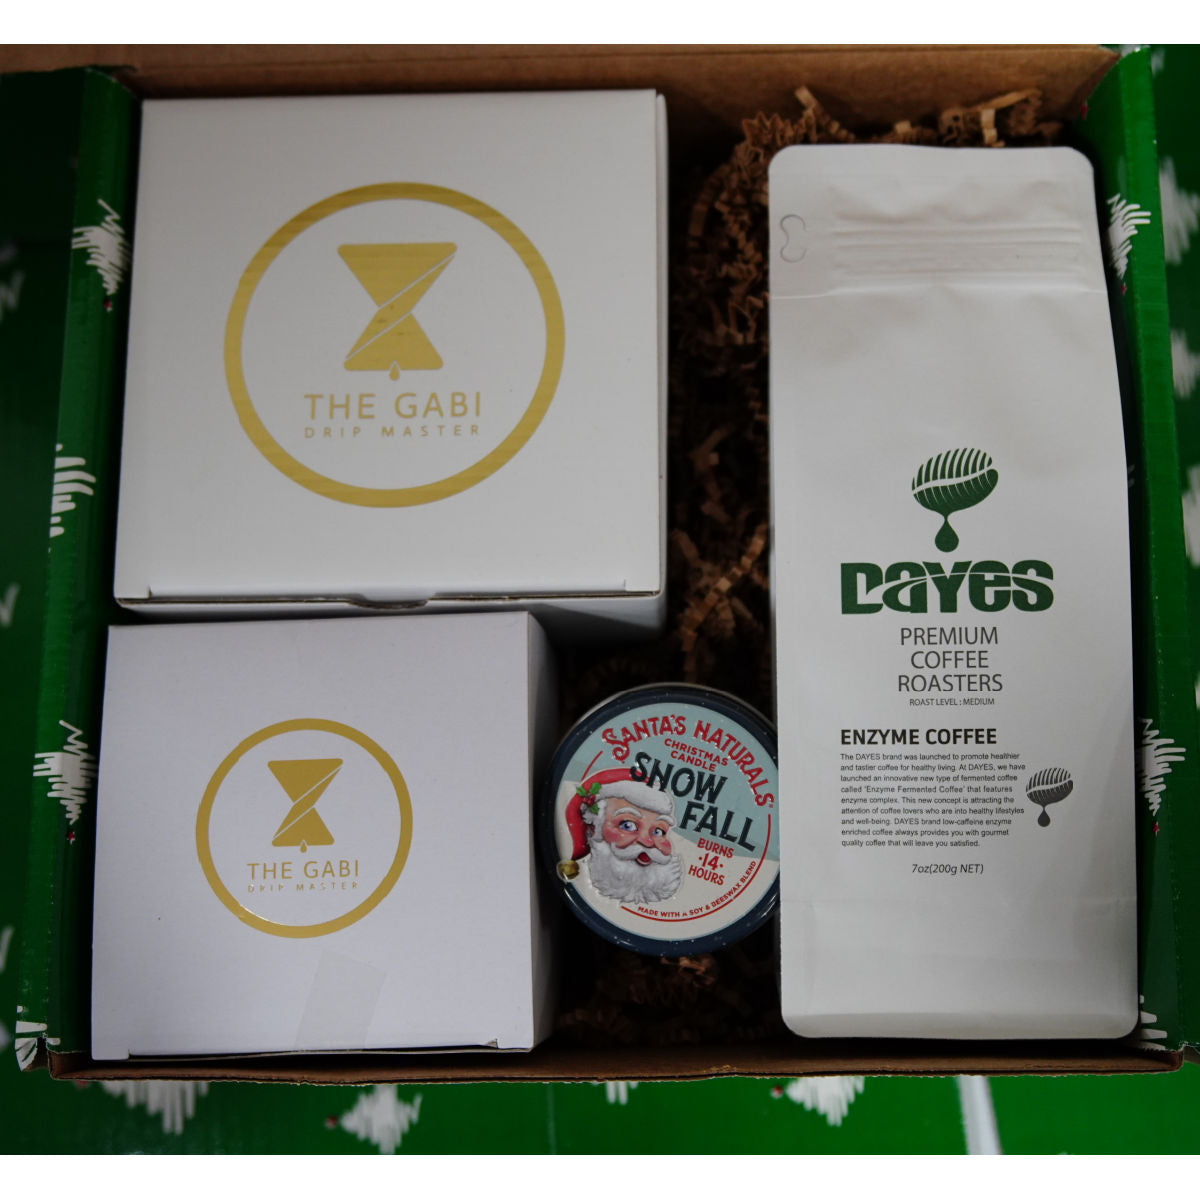 Christmas Spirit! Flavored Coffee Christmas Gift Box w/Treats & Accessories  - Perfect Christmas Present for Coffee Lovers! - FREE SHIPPING!